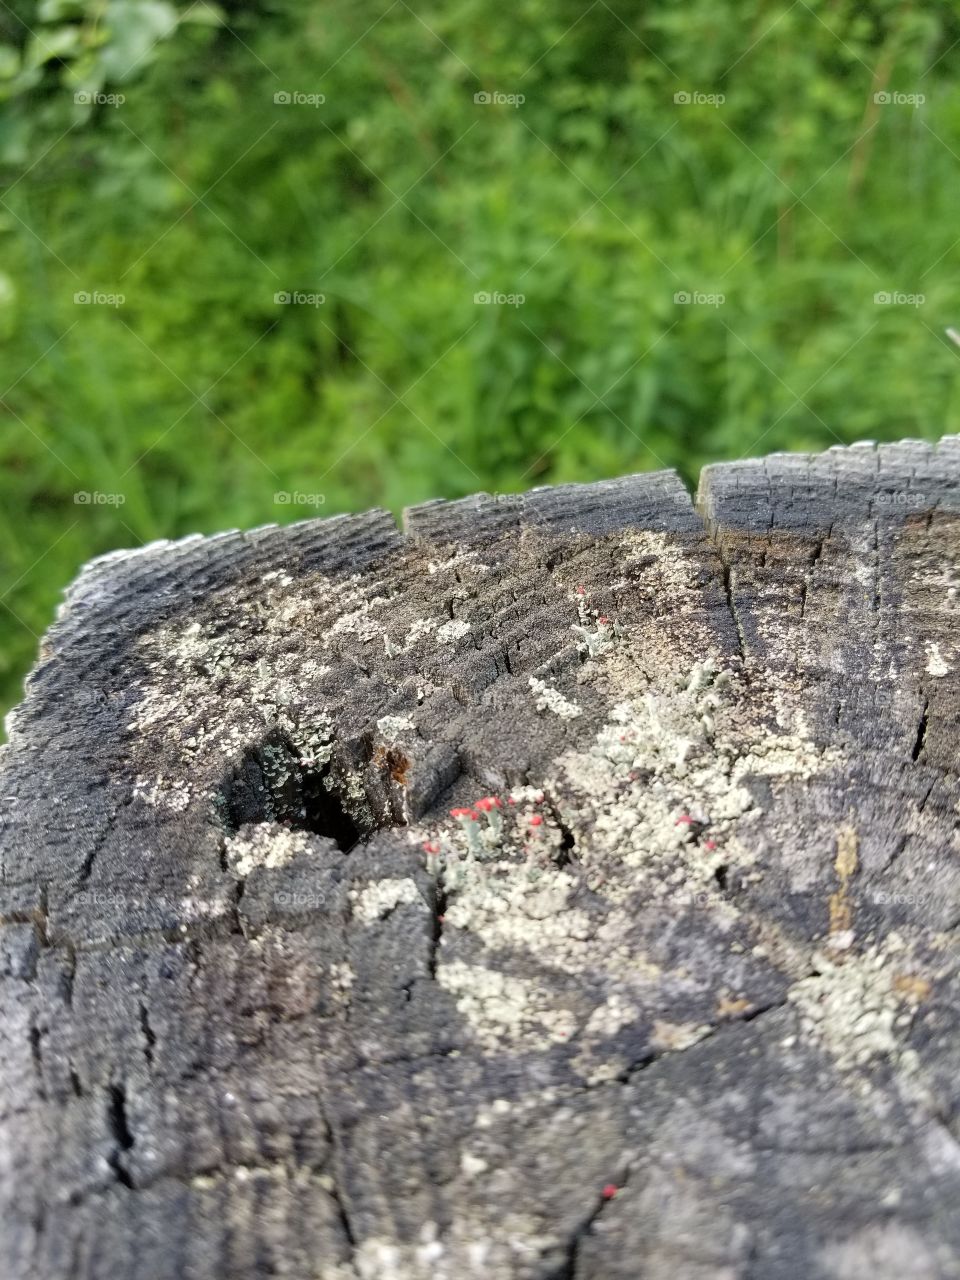 Beautiful little Red fungus growing on a post.